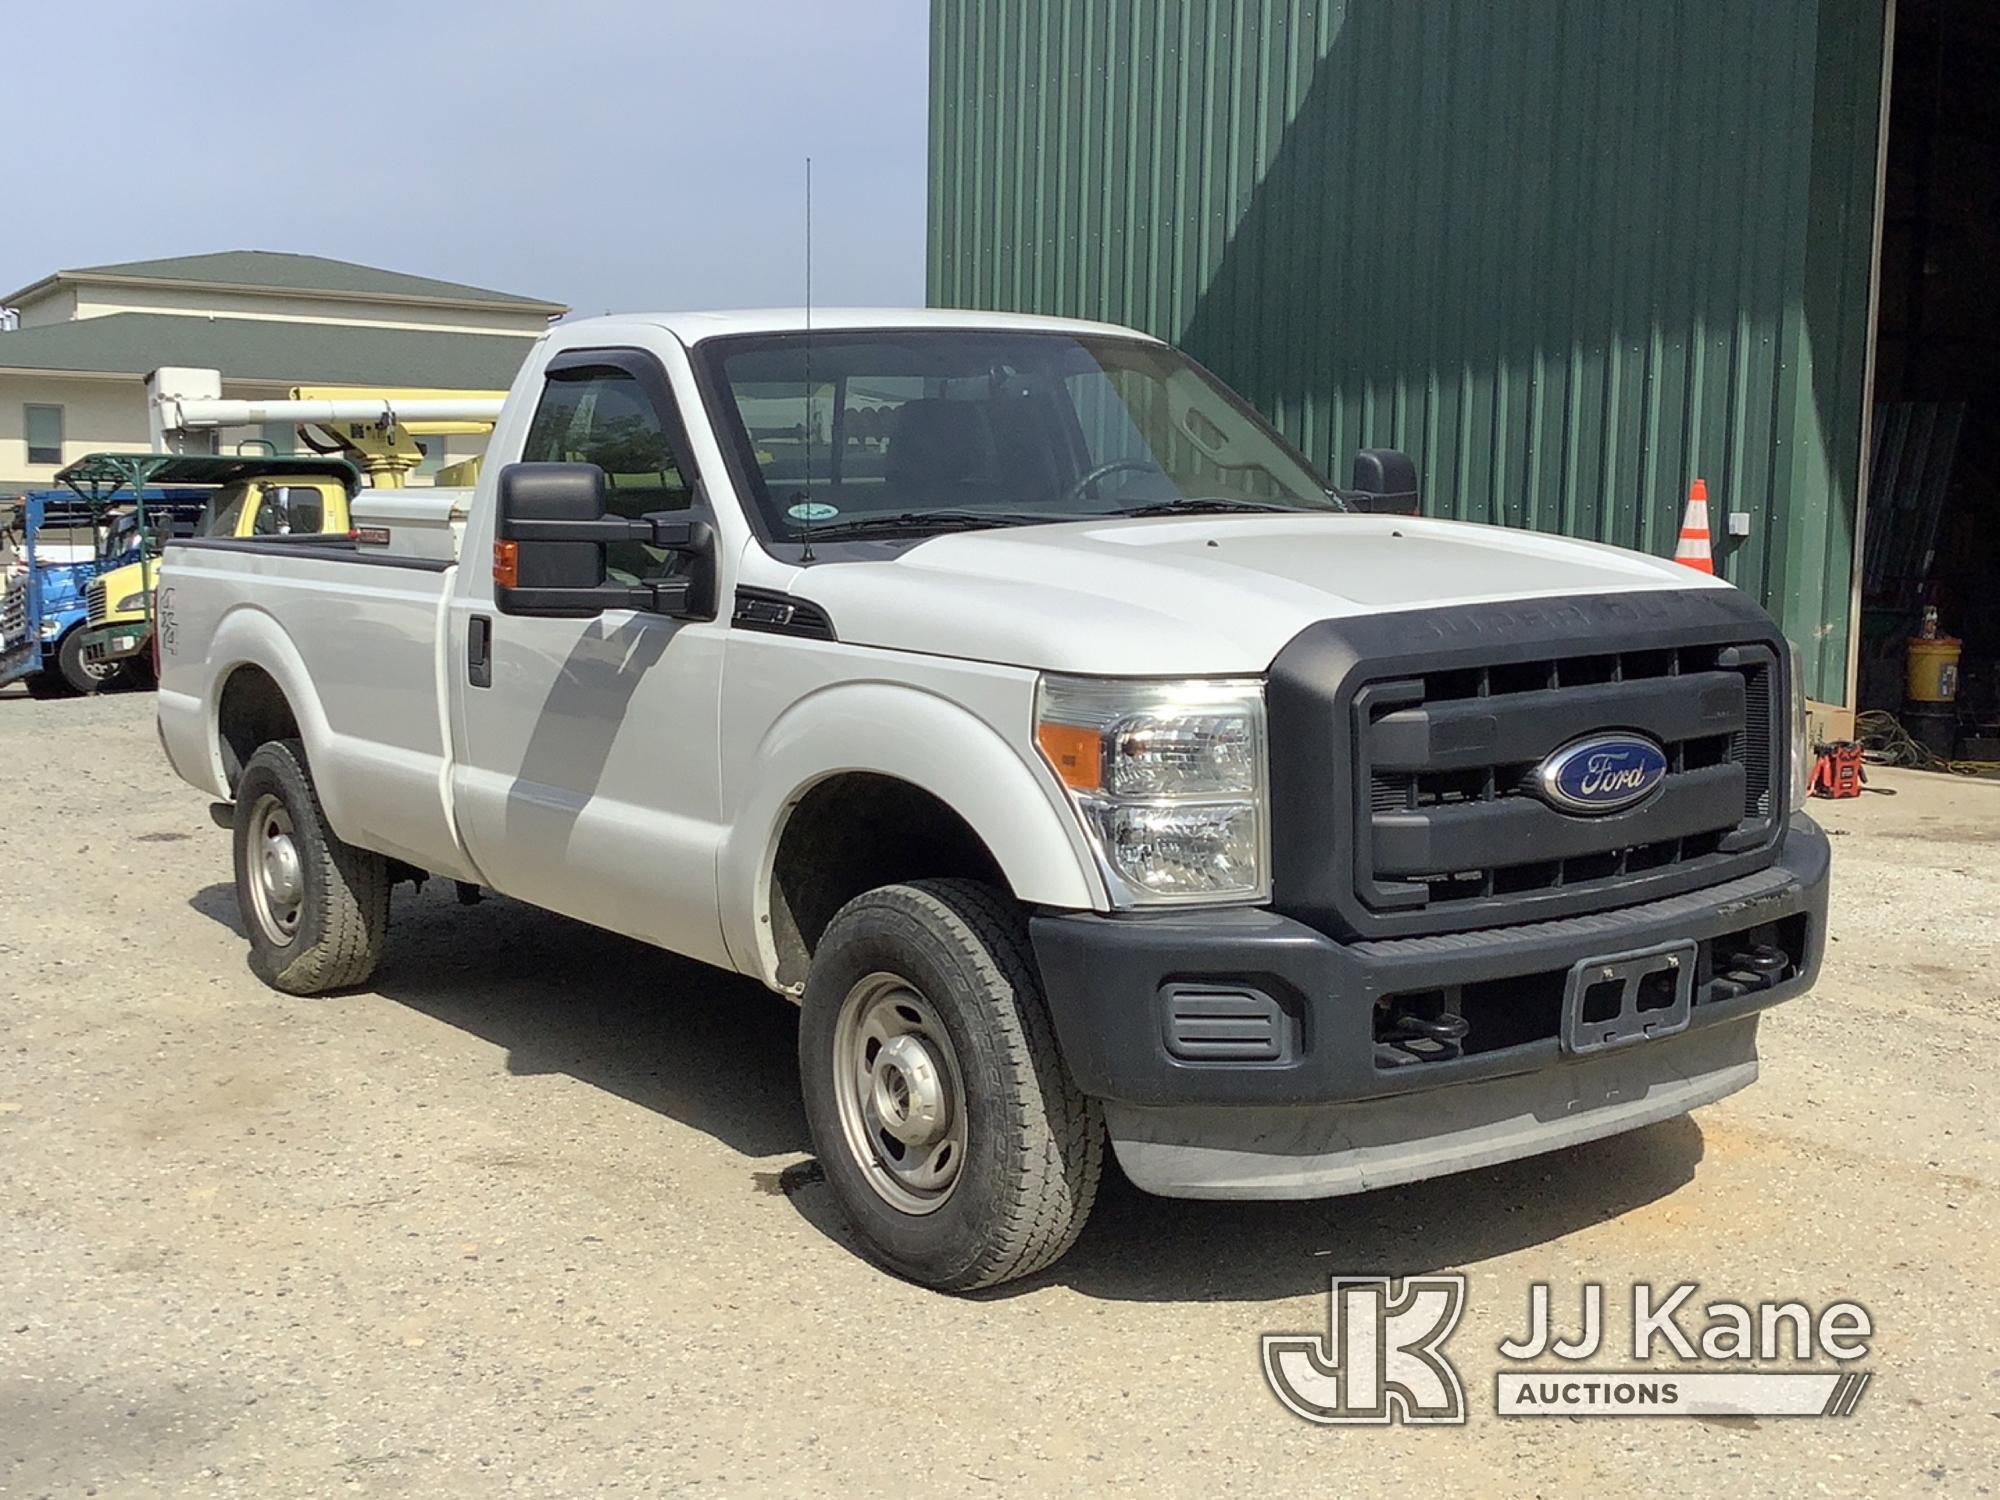 (Harmans, MD) 2011 Ford F250 4x4 Pickup Truck Runs & Moves, Bad BCM, Rust & Body Damage